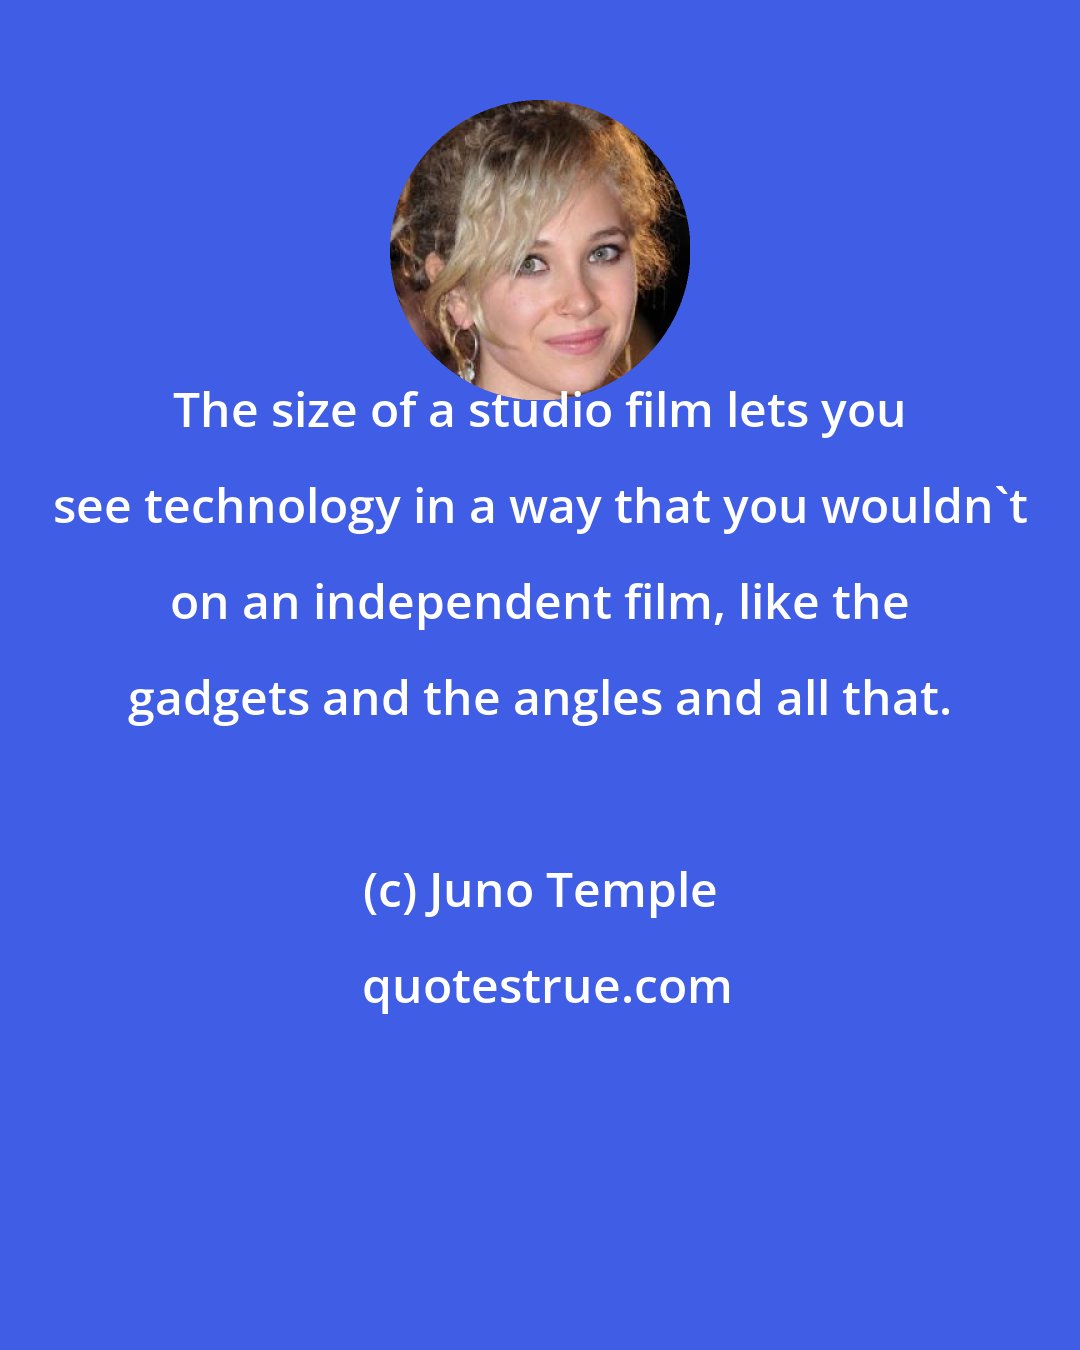 Juno Temple: The size of a studio film lets you see technology in a way that you wouldn't on an independent film, like the gadgets and the angles and all that.